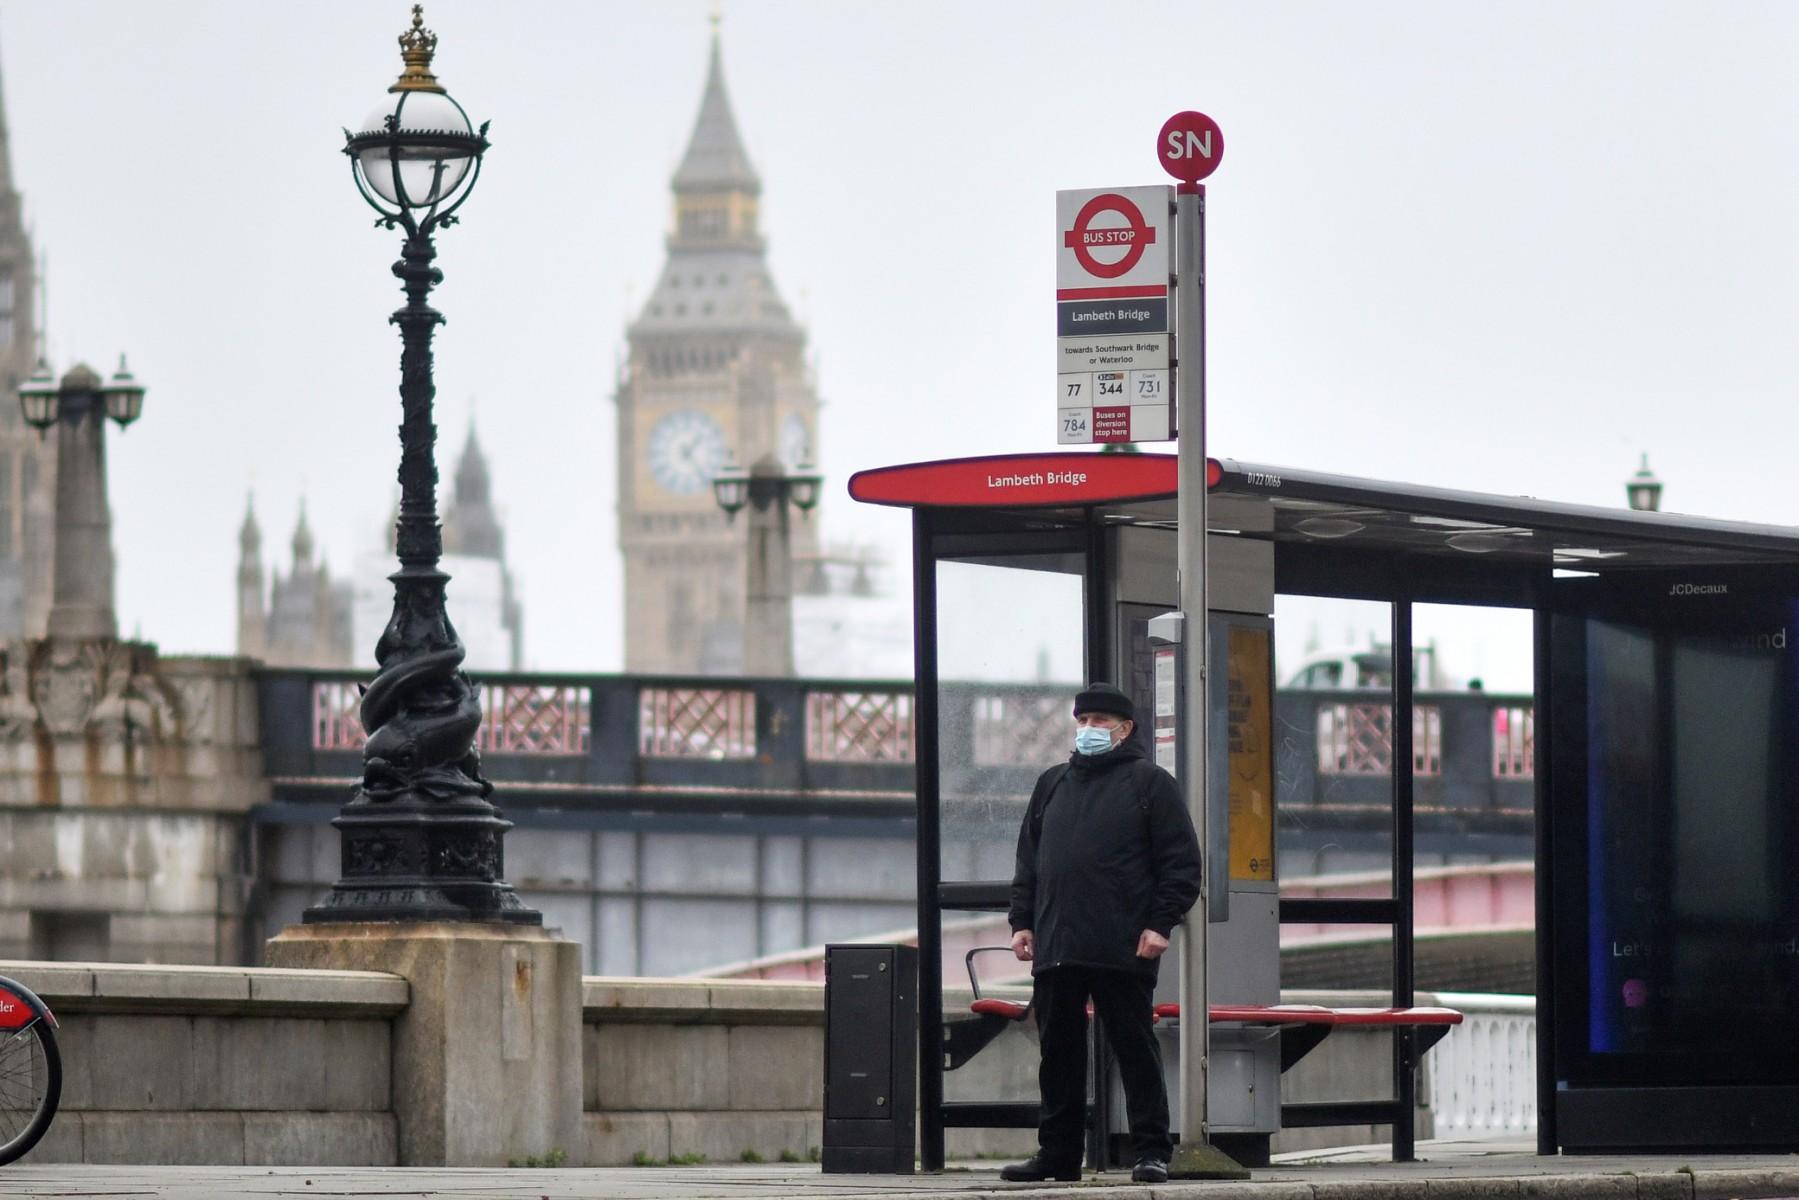 A commuter waits at a bus stop near the Elizabeth Tower, commonly known as Big Ben, at the Palace of Westminster in London on Feb 16. Symptoms in humans of monkeypox – which is endemic in parts of Central and Western Africa – include lesions, fever, muscle ache and chills. Photo: AFP